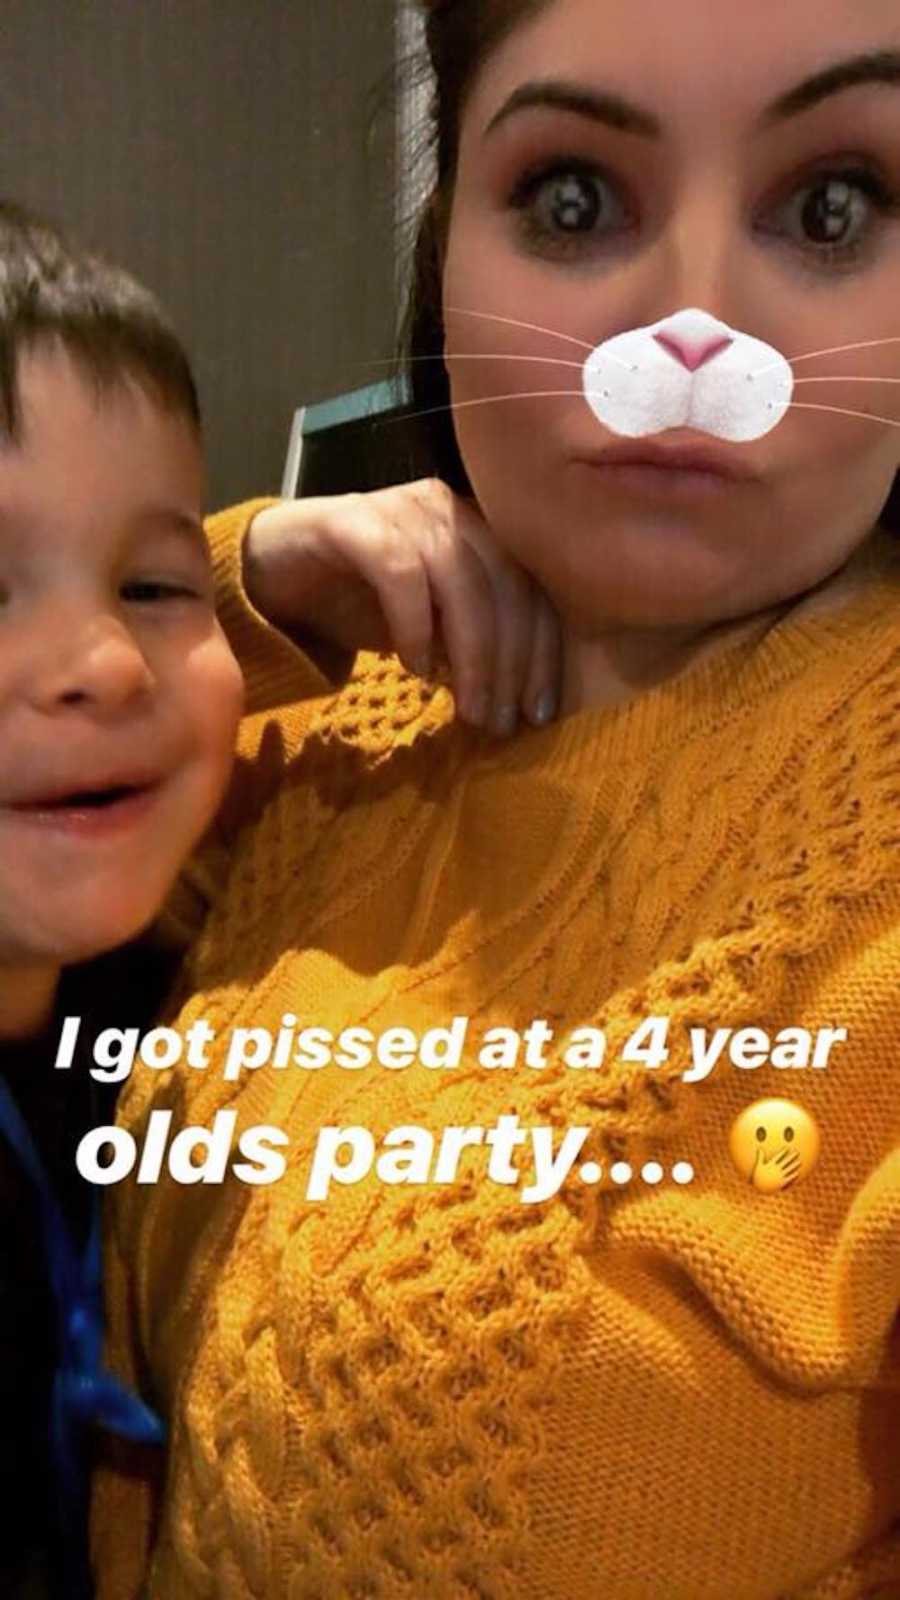 Mother takes selfie with son with rabbit nose filter with words that say, "I got pissed a a 4 year olds party"